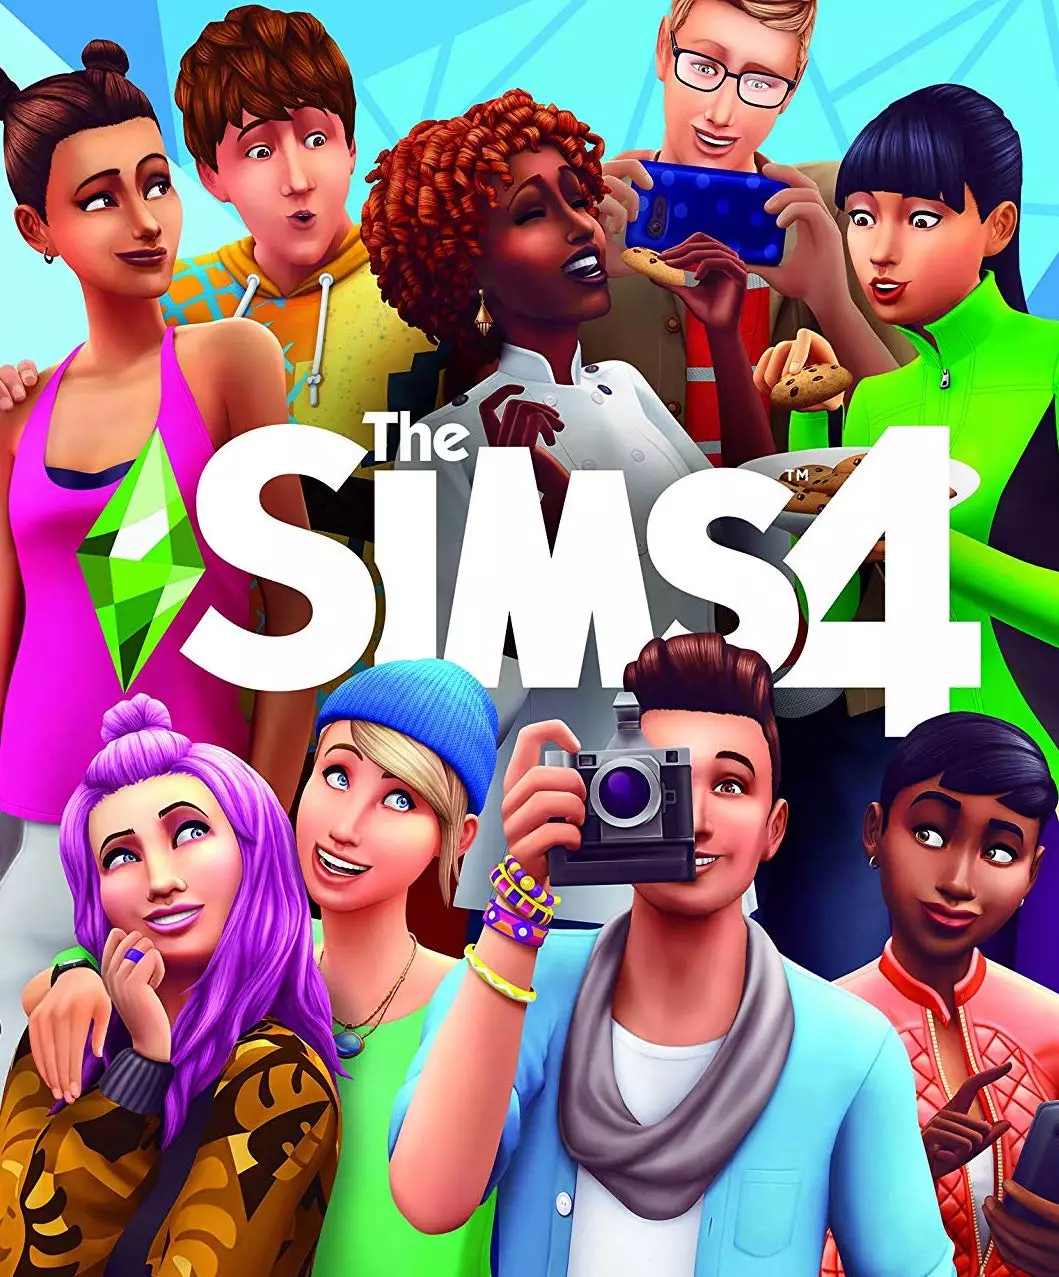 The Digital Deluxe Edition of Sims 4 has been reduced from £44.99 to £11.24 (